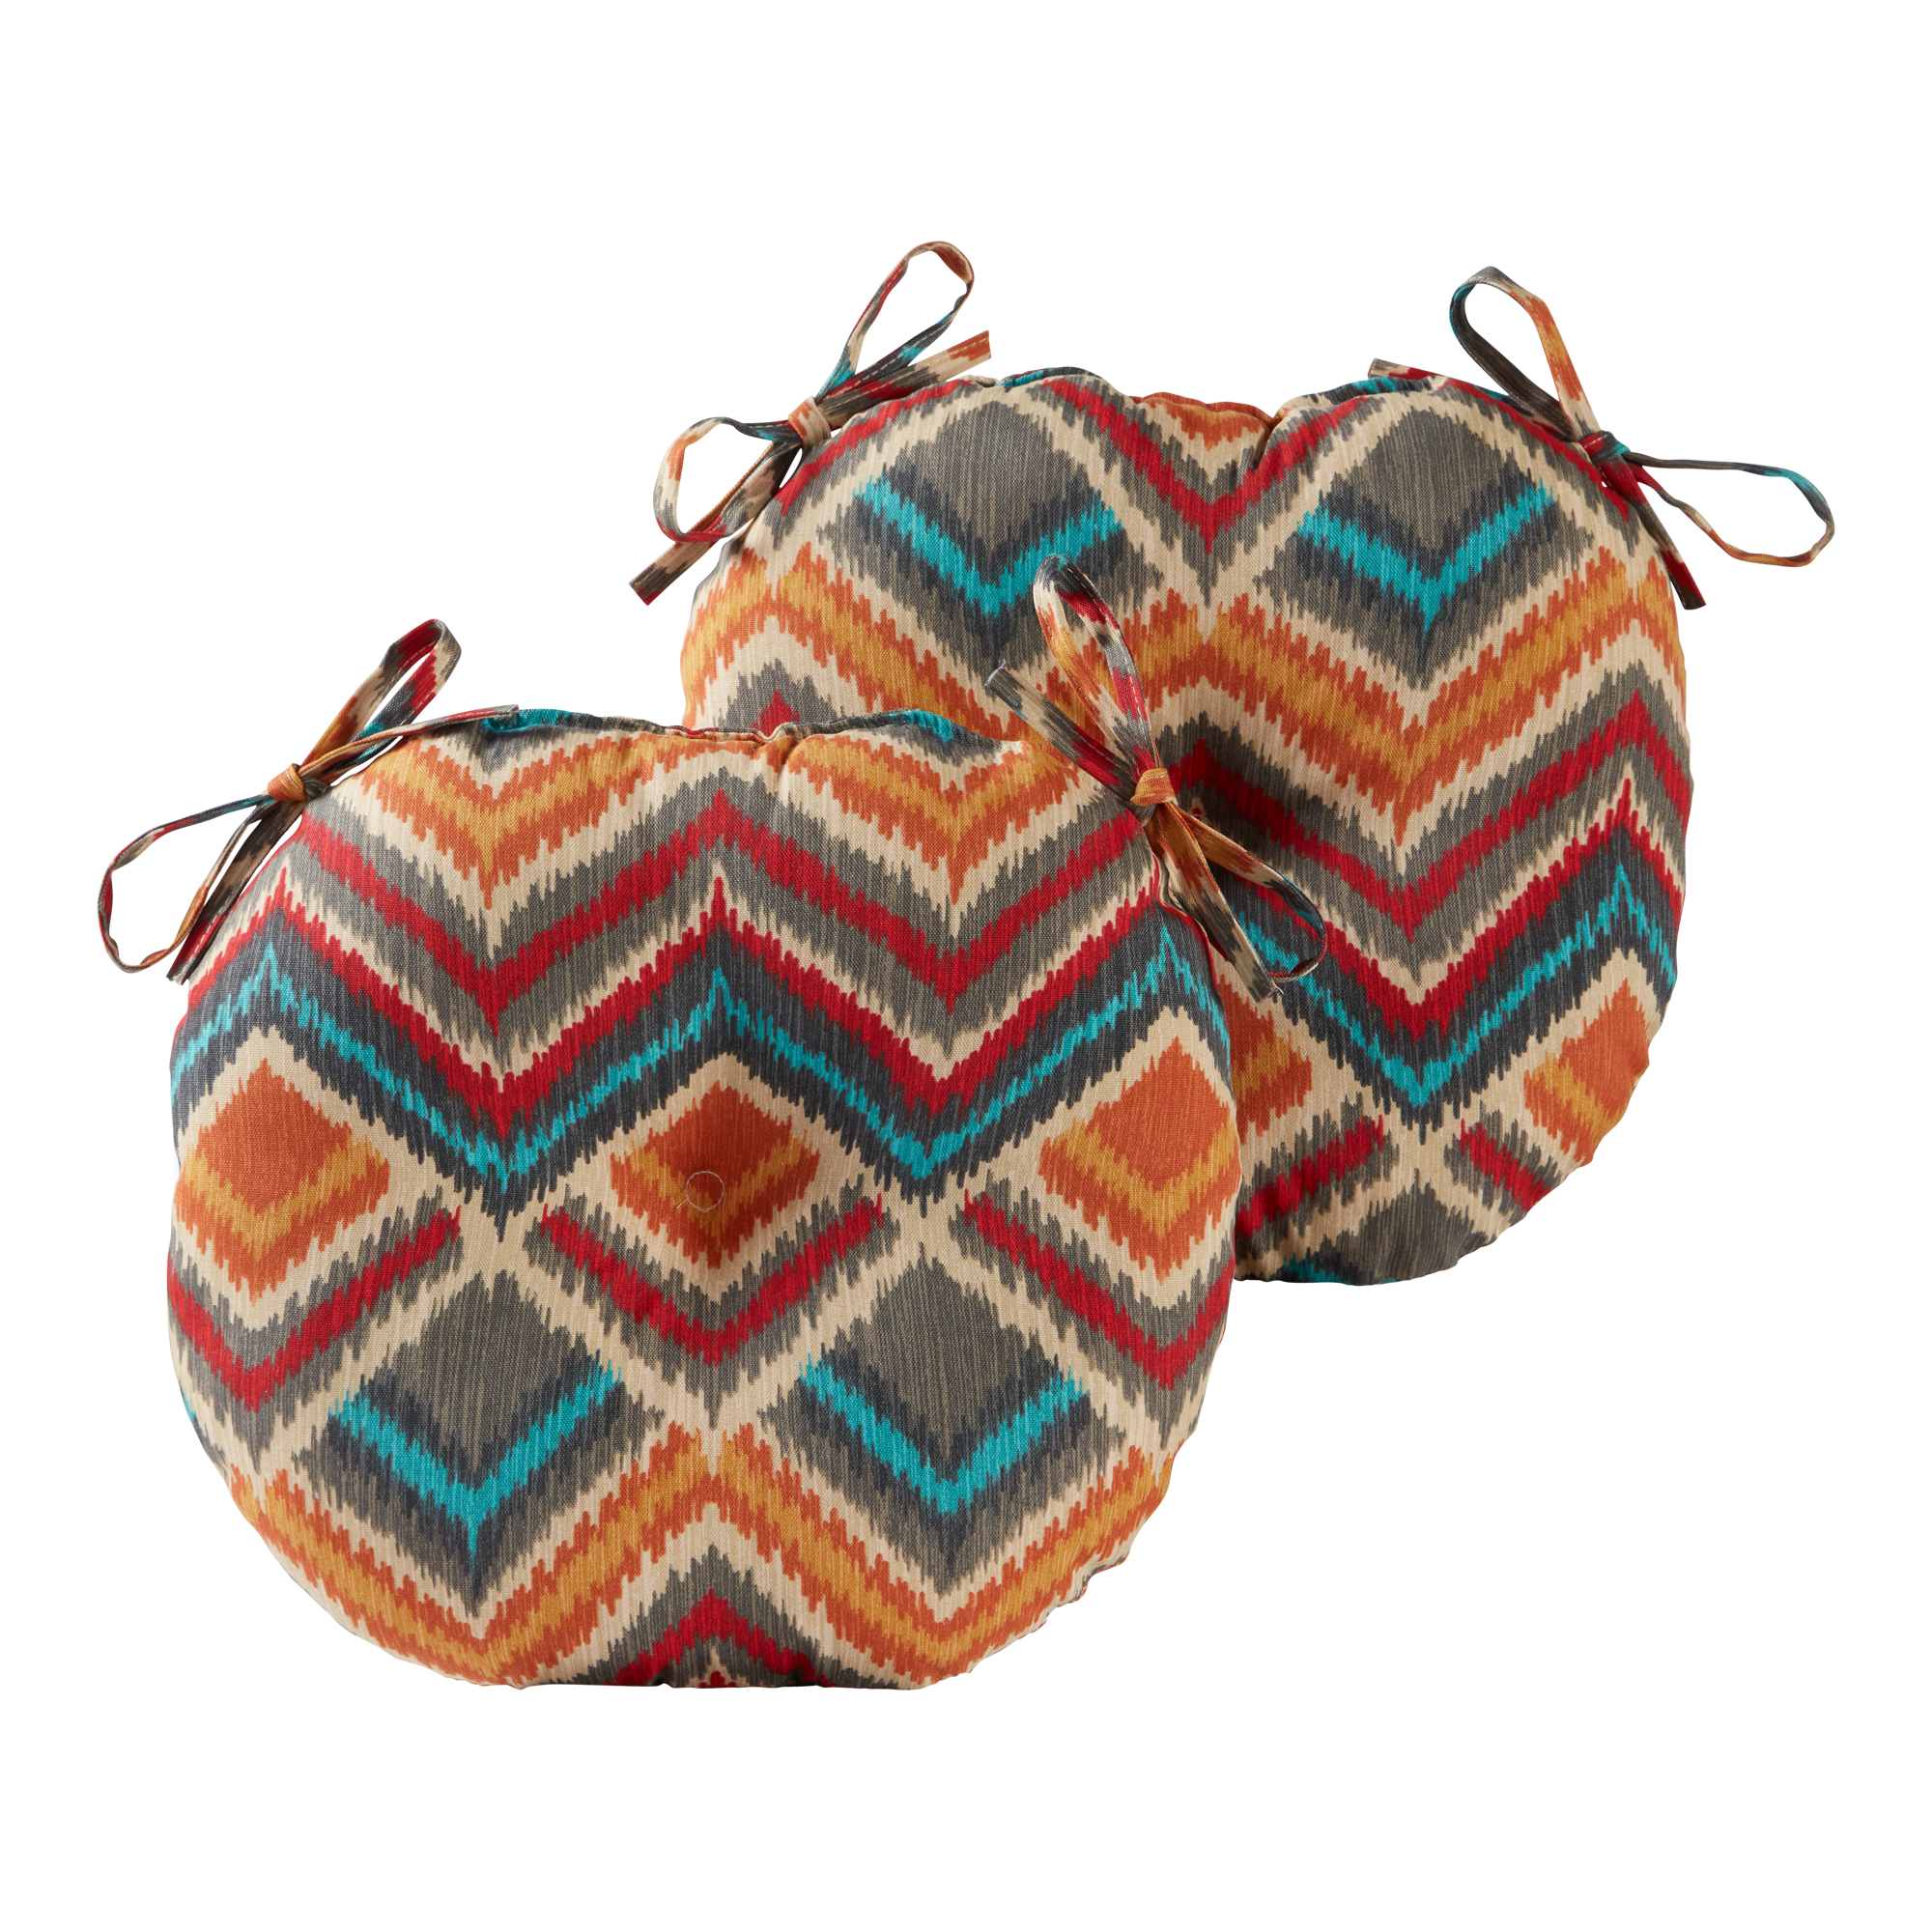 Greendale Home Fashions Surreal Chevron 15 in. Round Outdoor Reversible Bistro Seat Cushion (Set of 2) - image 1 of 7